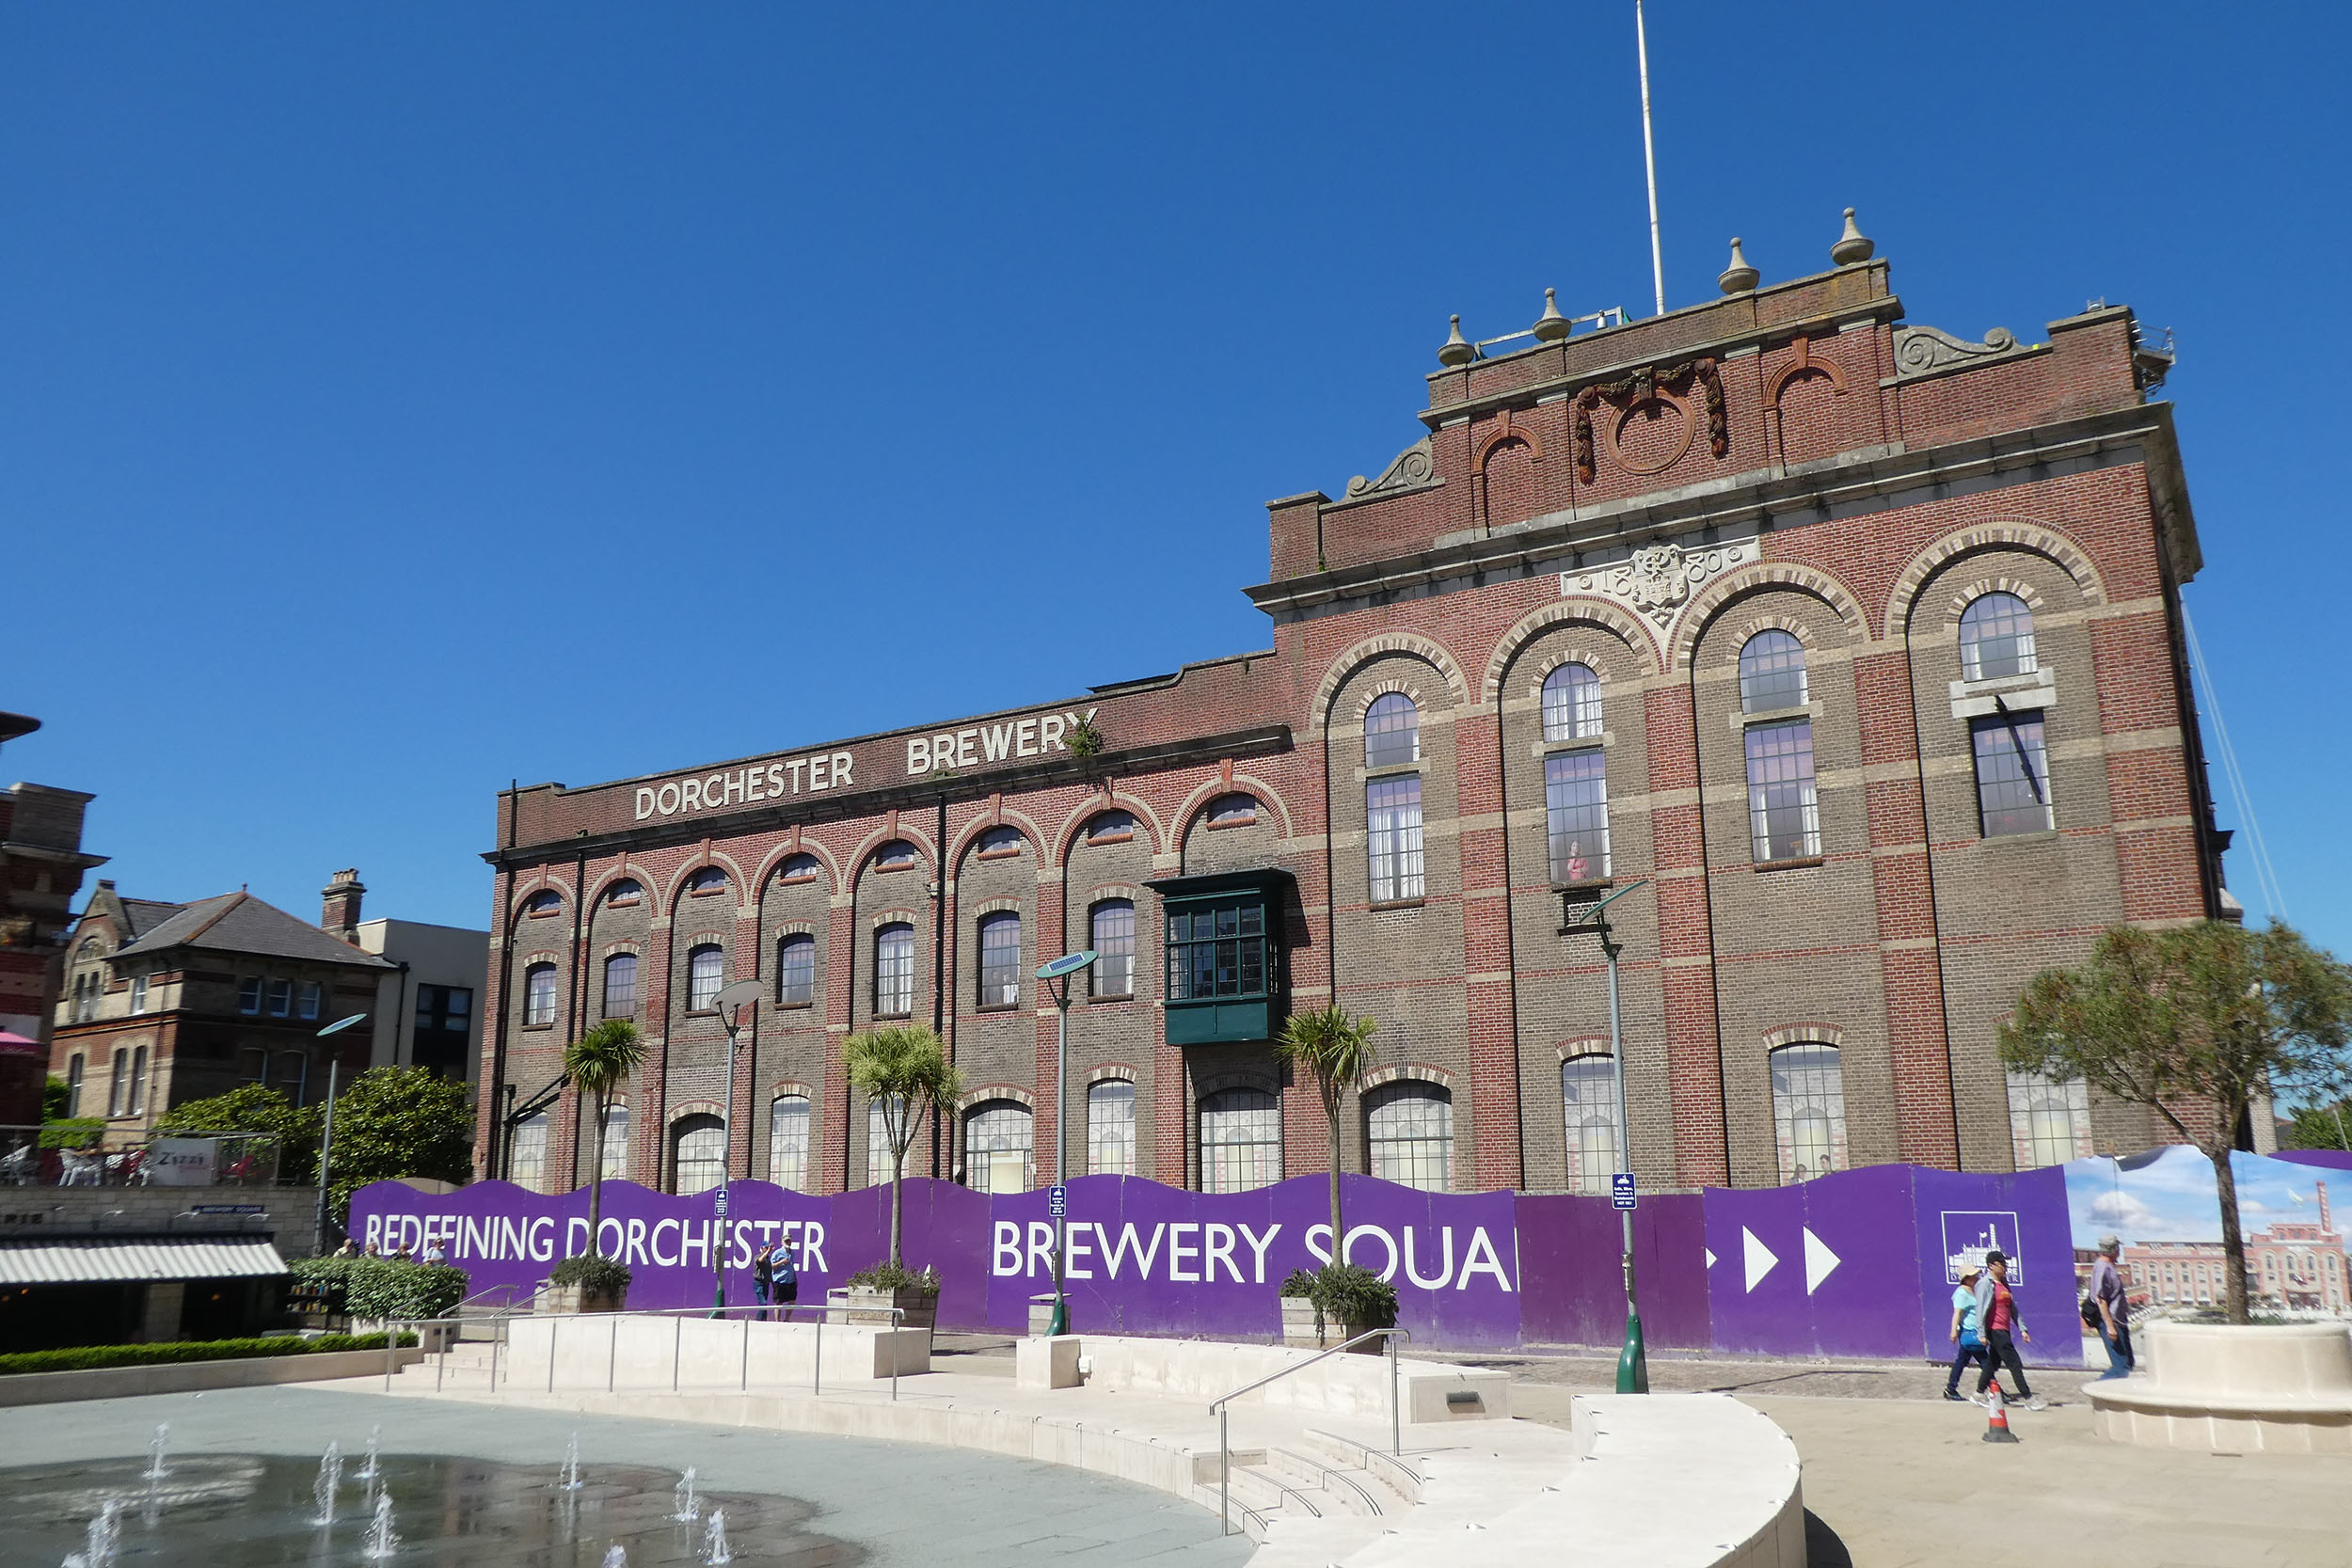 Image of the Brewery Square in Dorchester, where an old brewery site has been used as the basis for regeneration including new retail and living space.